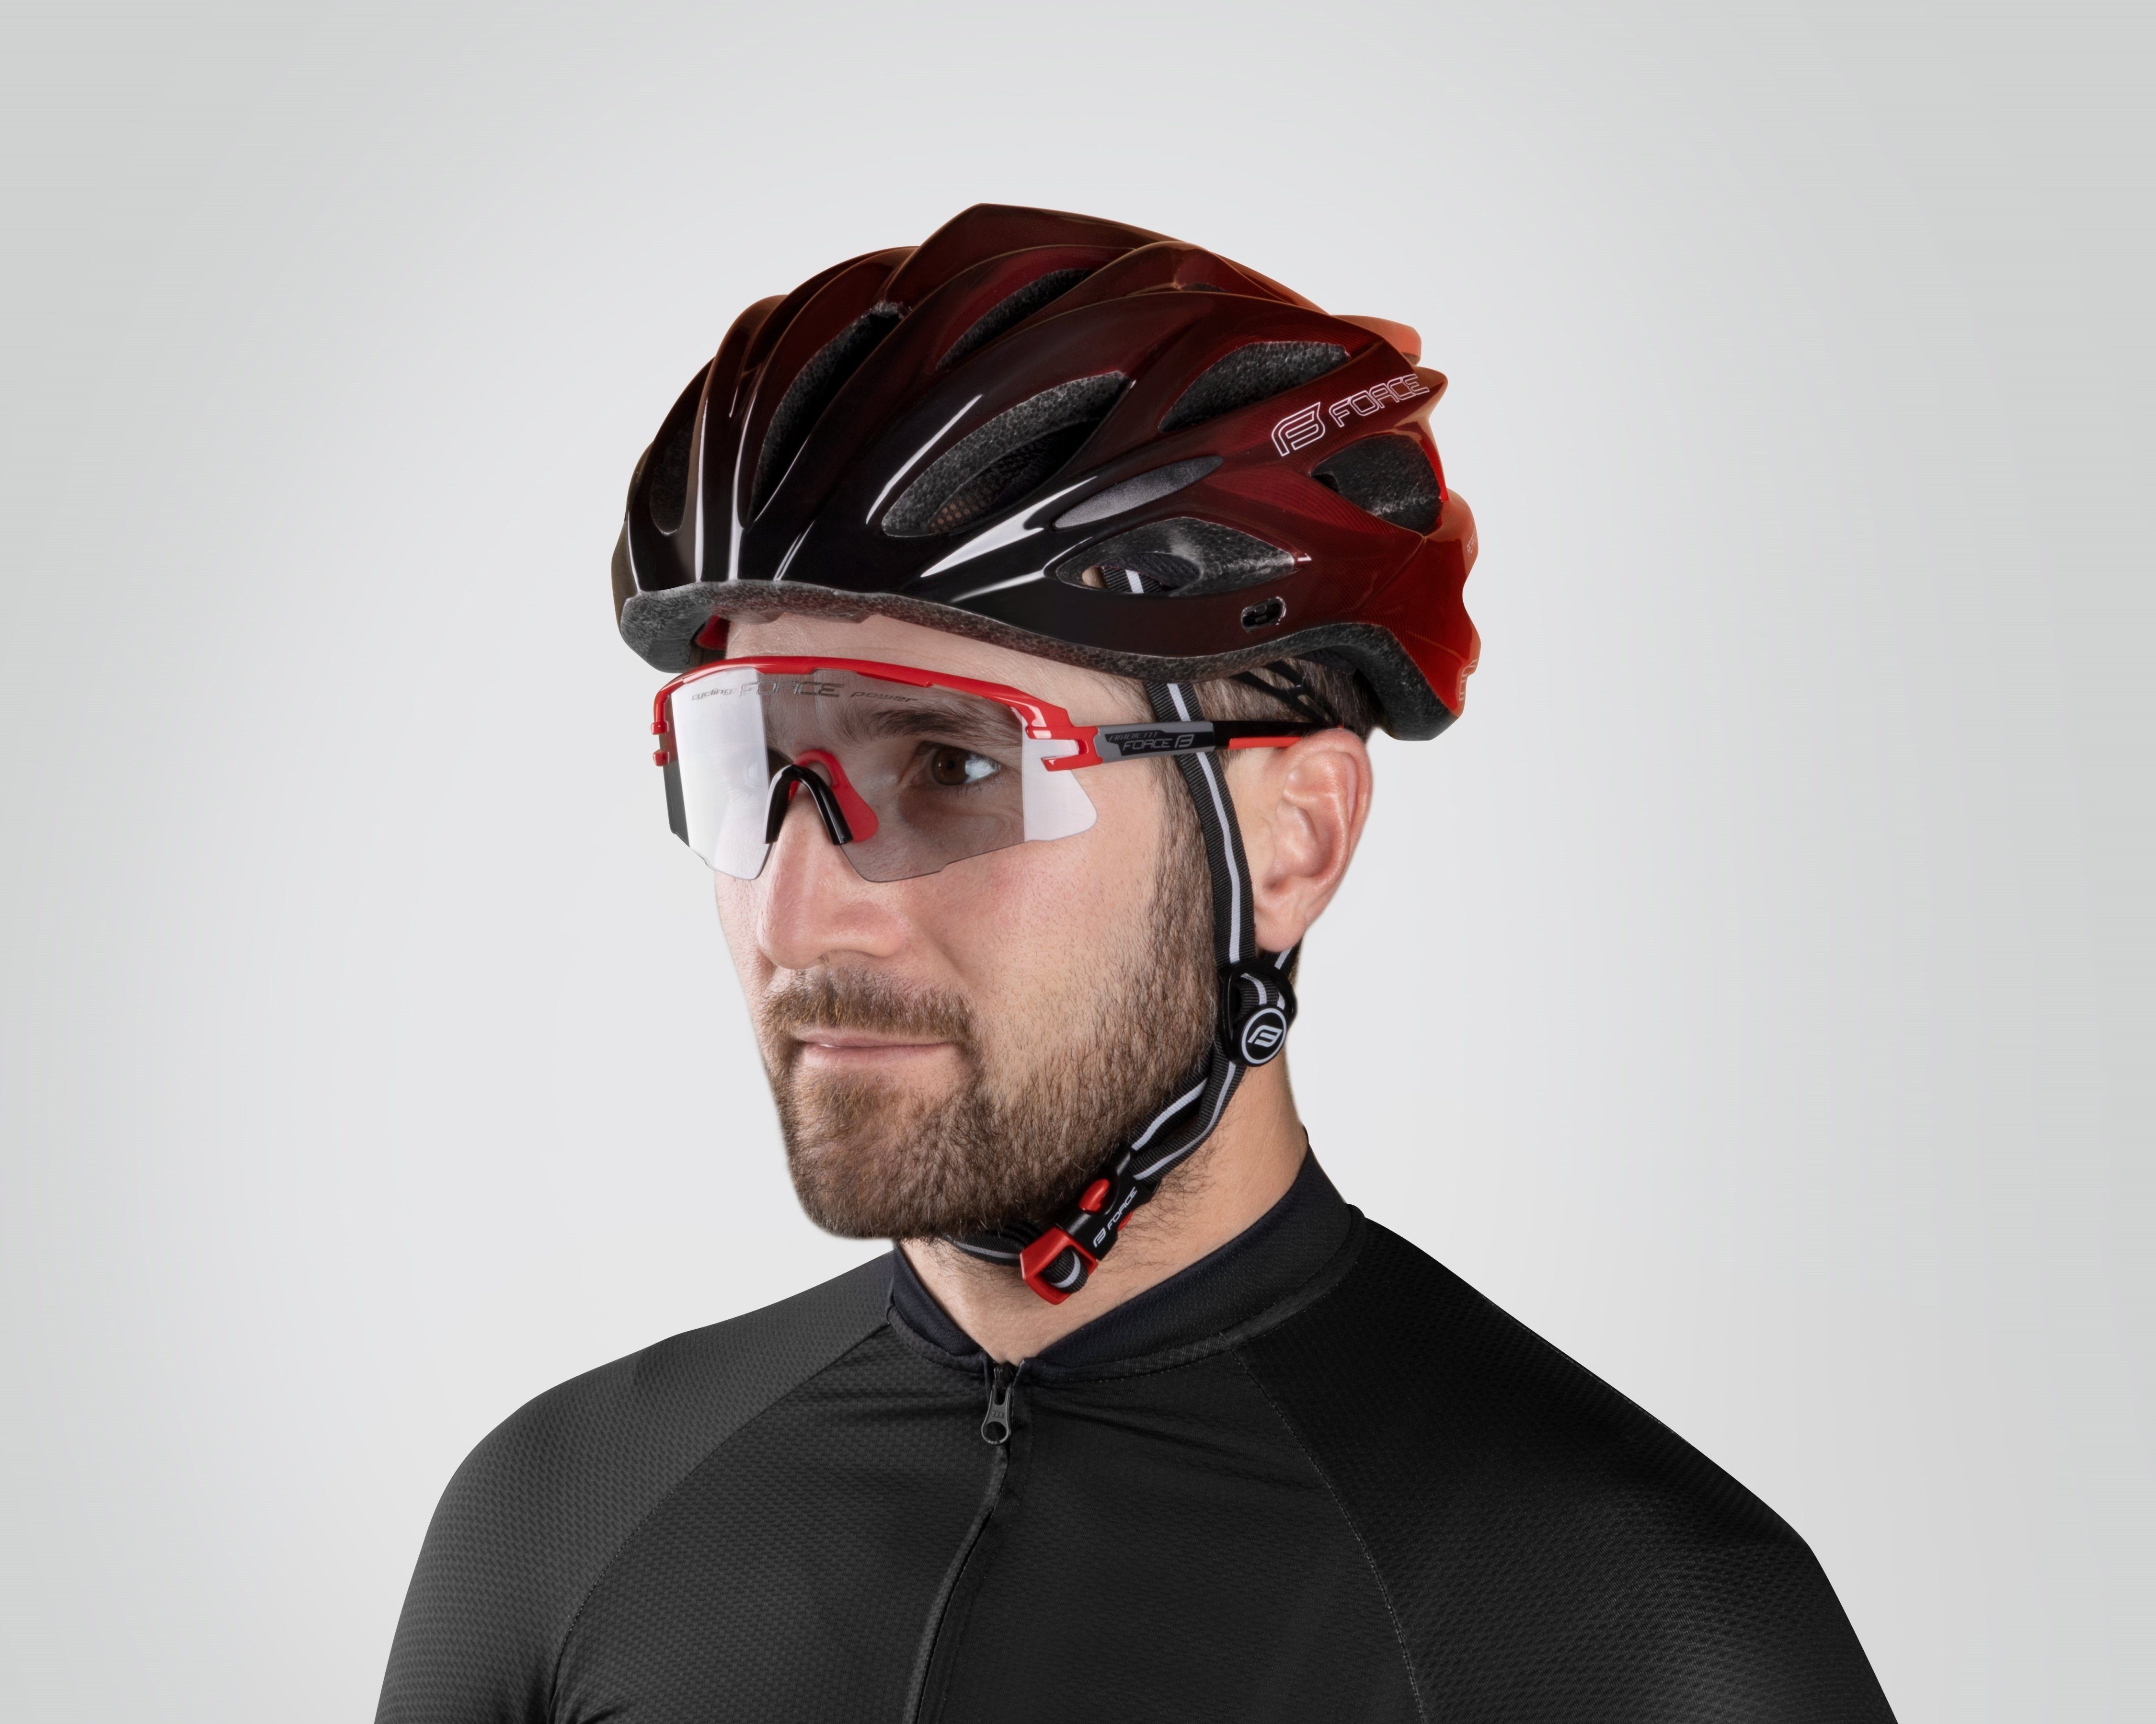 FORCE Fahrradbrille Sonnenbrille FORCE grau-rot, photochrom AMBIENT